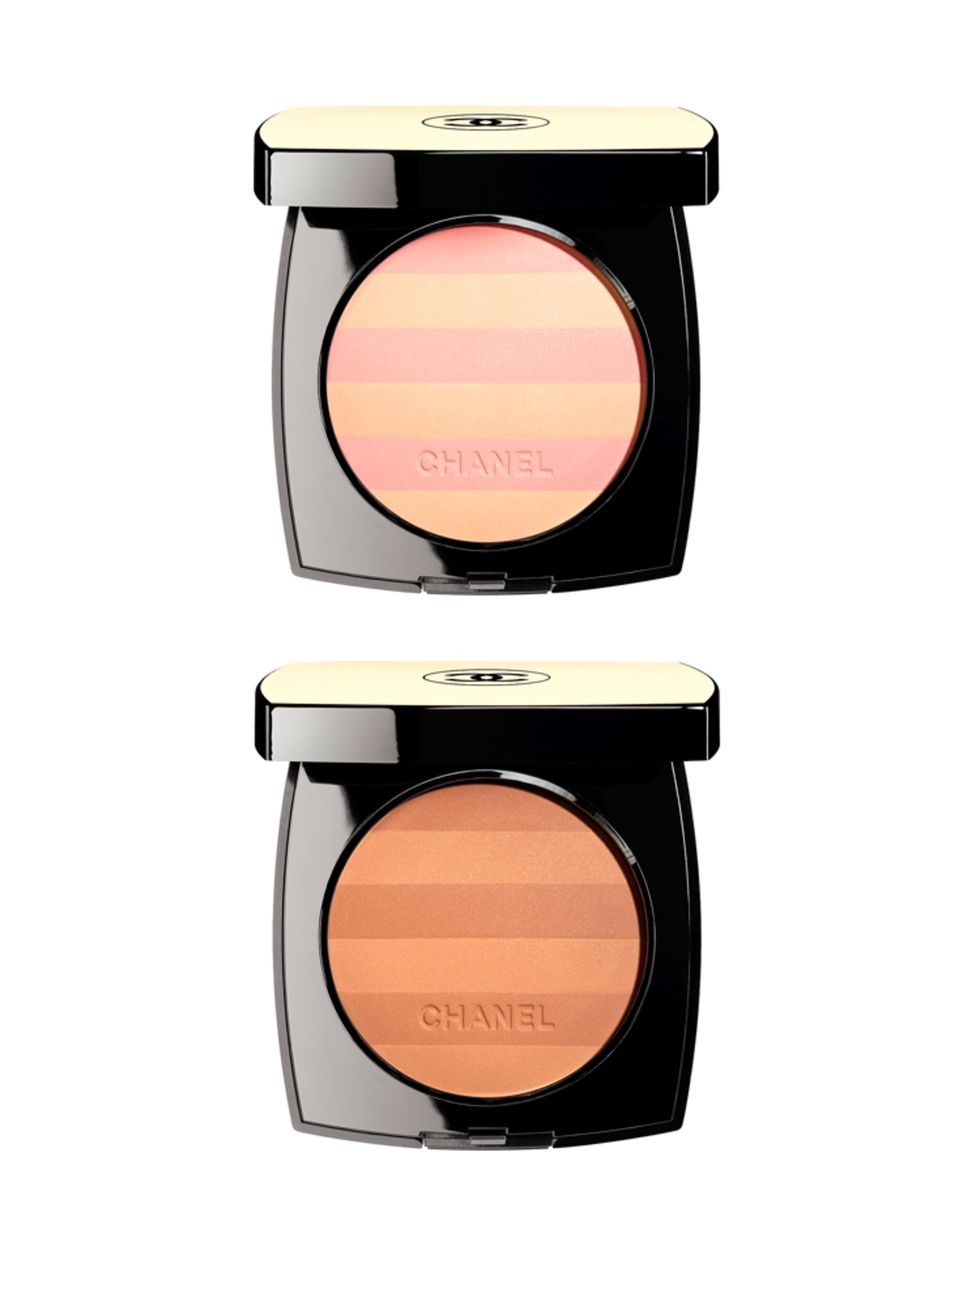 <p><a href="http://www.chanel.com/en_GB/fragrance-beauty/Makeup---Healthy-glow-makeup---LES-BEIGES-182522" target="_blank">Chanel Les Beiges Healthy Glow Multi-Colour Marniere, £44 each</a></p>

<p>Of course you love a Breton stripe, who doesn't? But in a